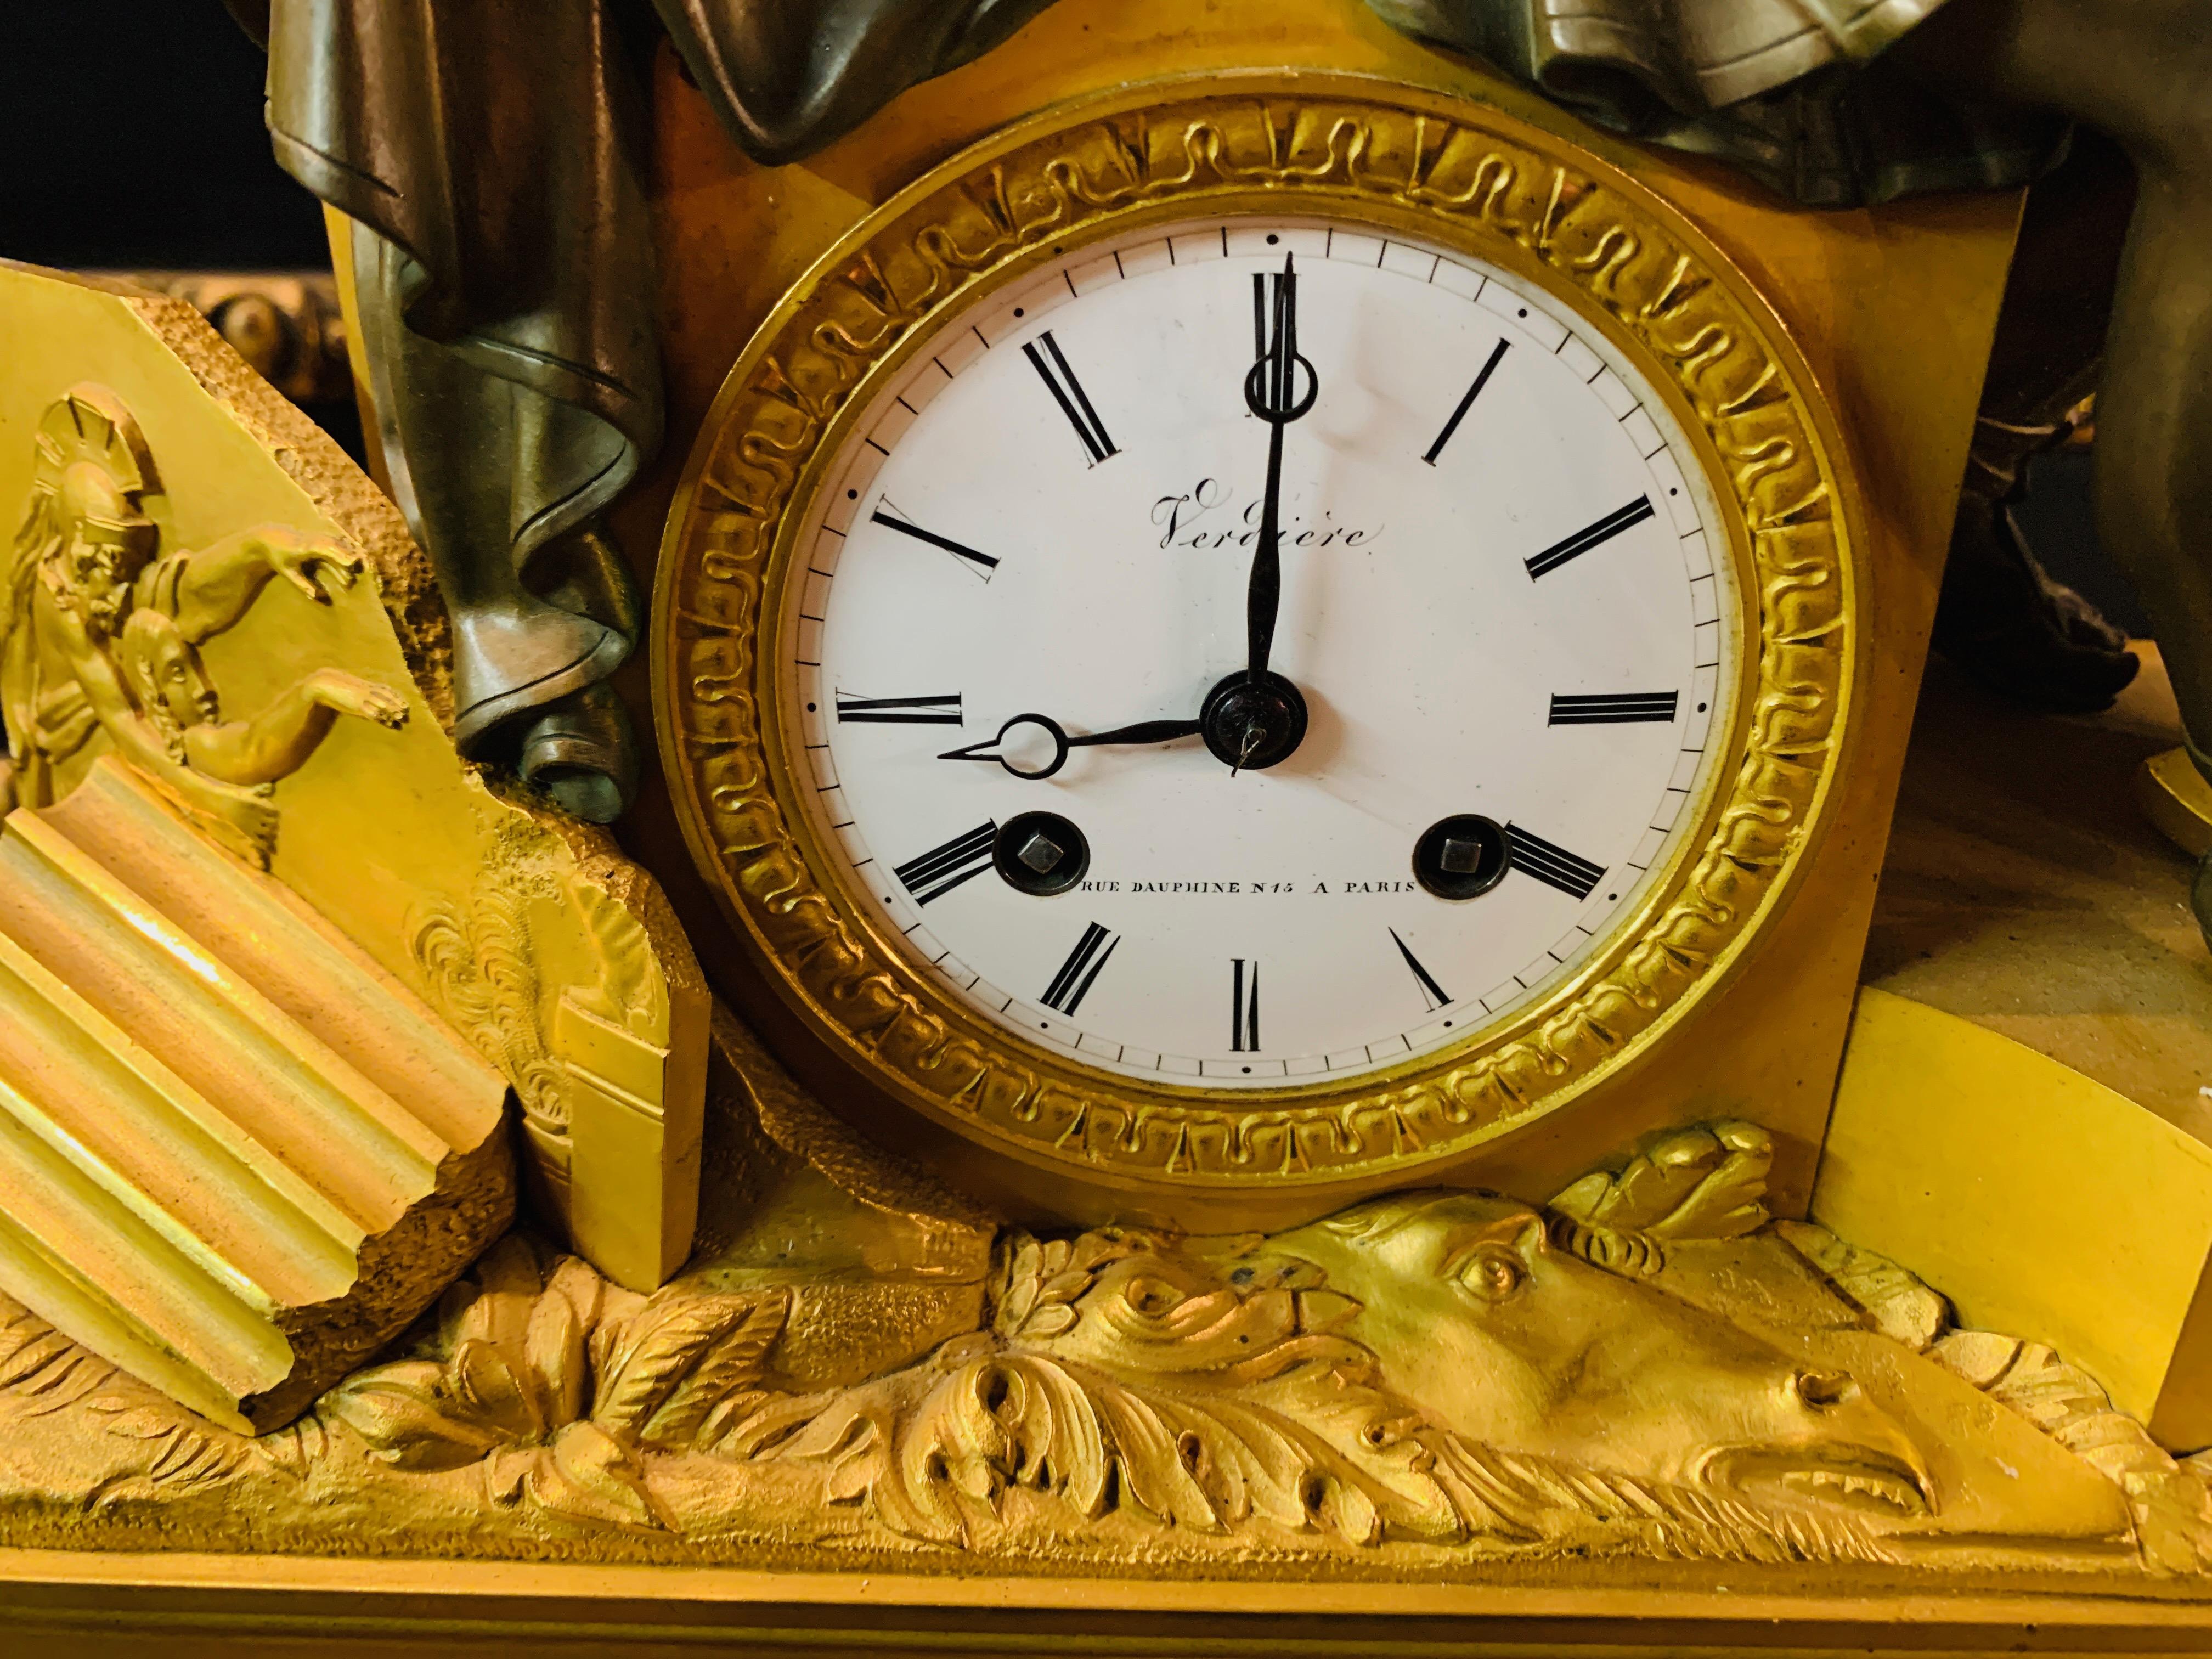 Empire figure mantel clock fire-gilded, Paris around 1790, Roman seat on a base with ornaments and rocailles, helmet and warriors decorated, white enamel dial with Roman numerals and minute track, blackened hands, French. Roundwork with 1/2 hour